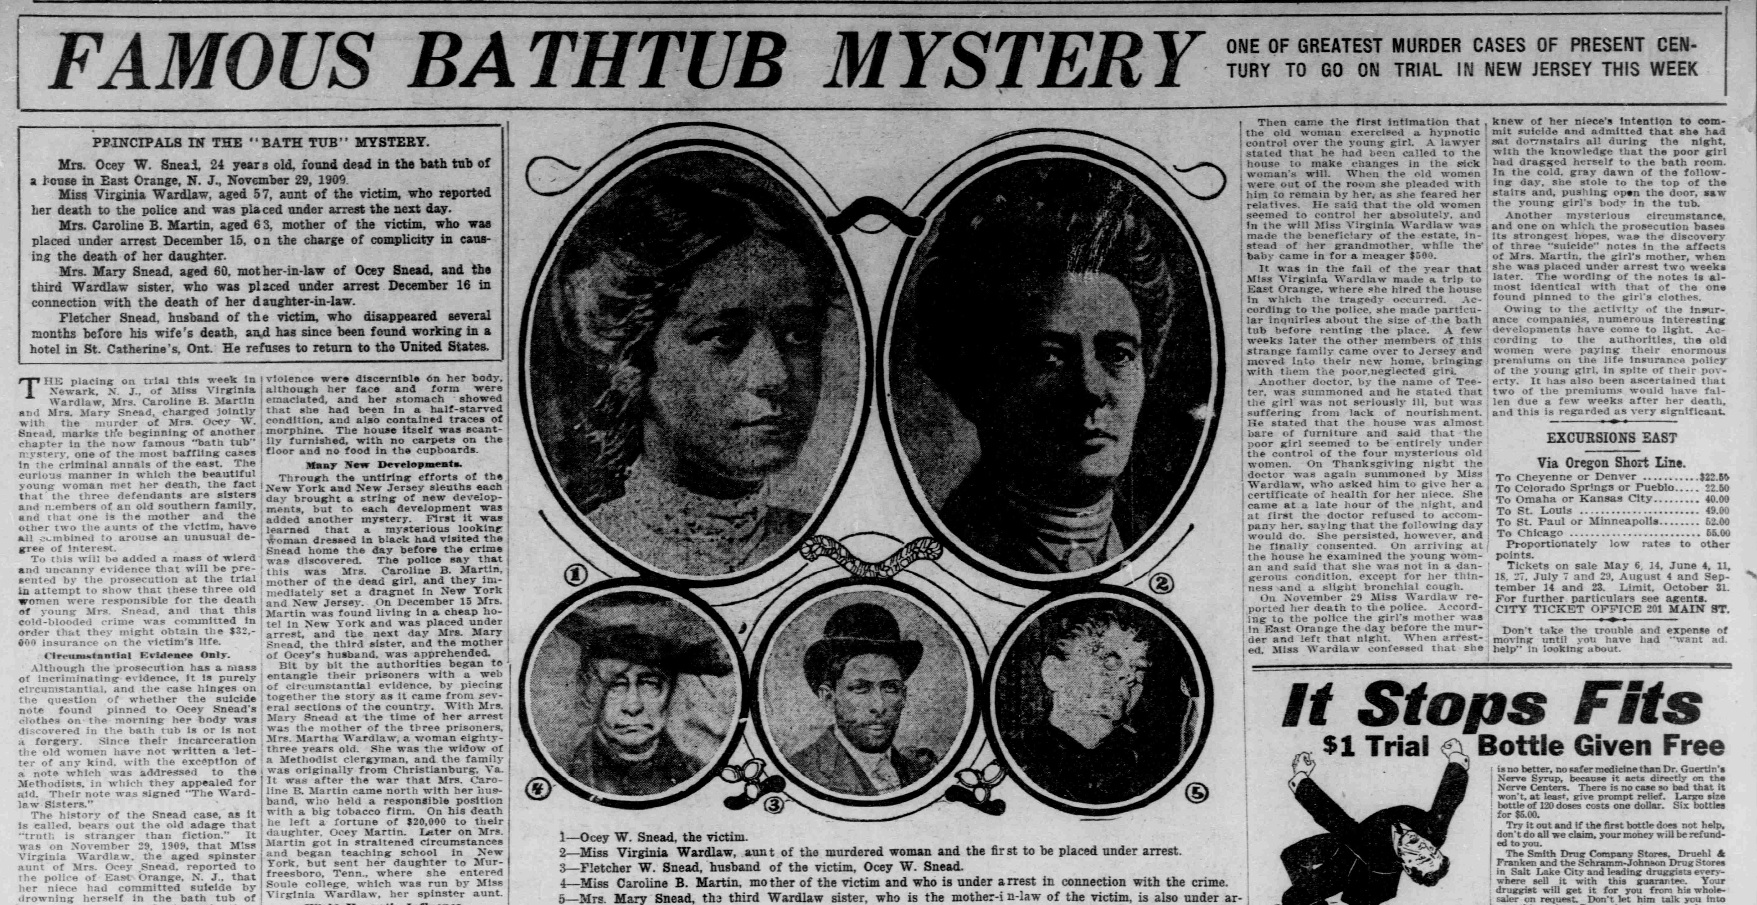 more dreadful than the most gruesome of tales: Newspaper Coverage of The East Orange Bathtub Mystery